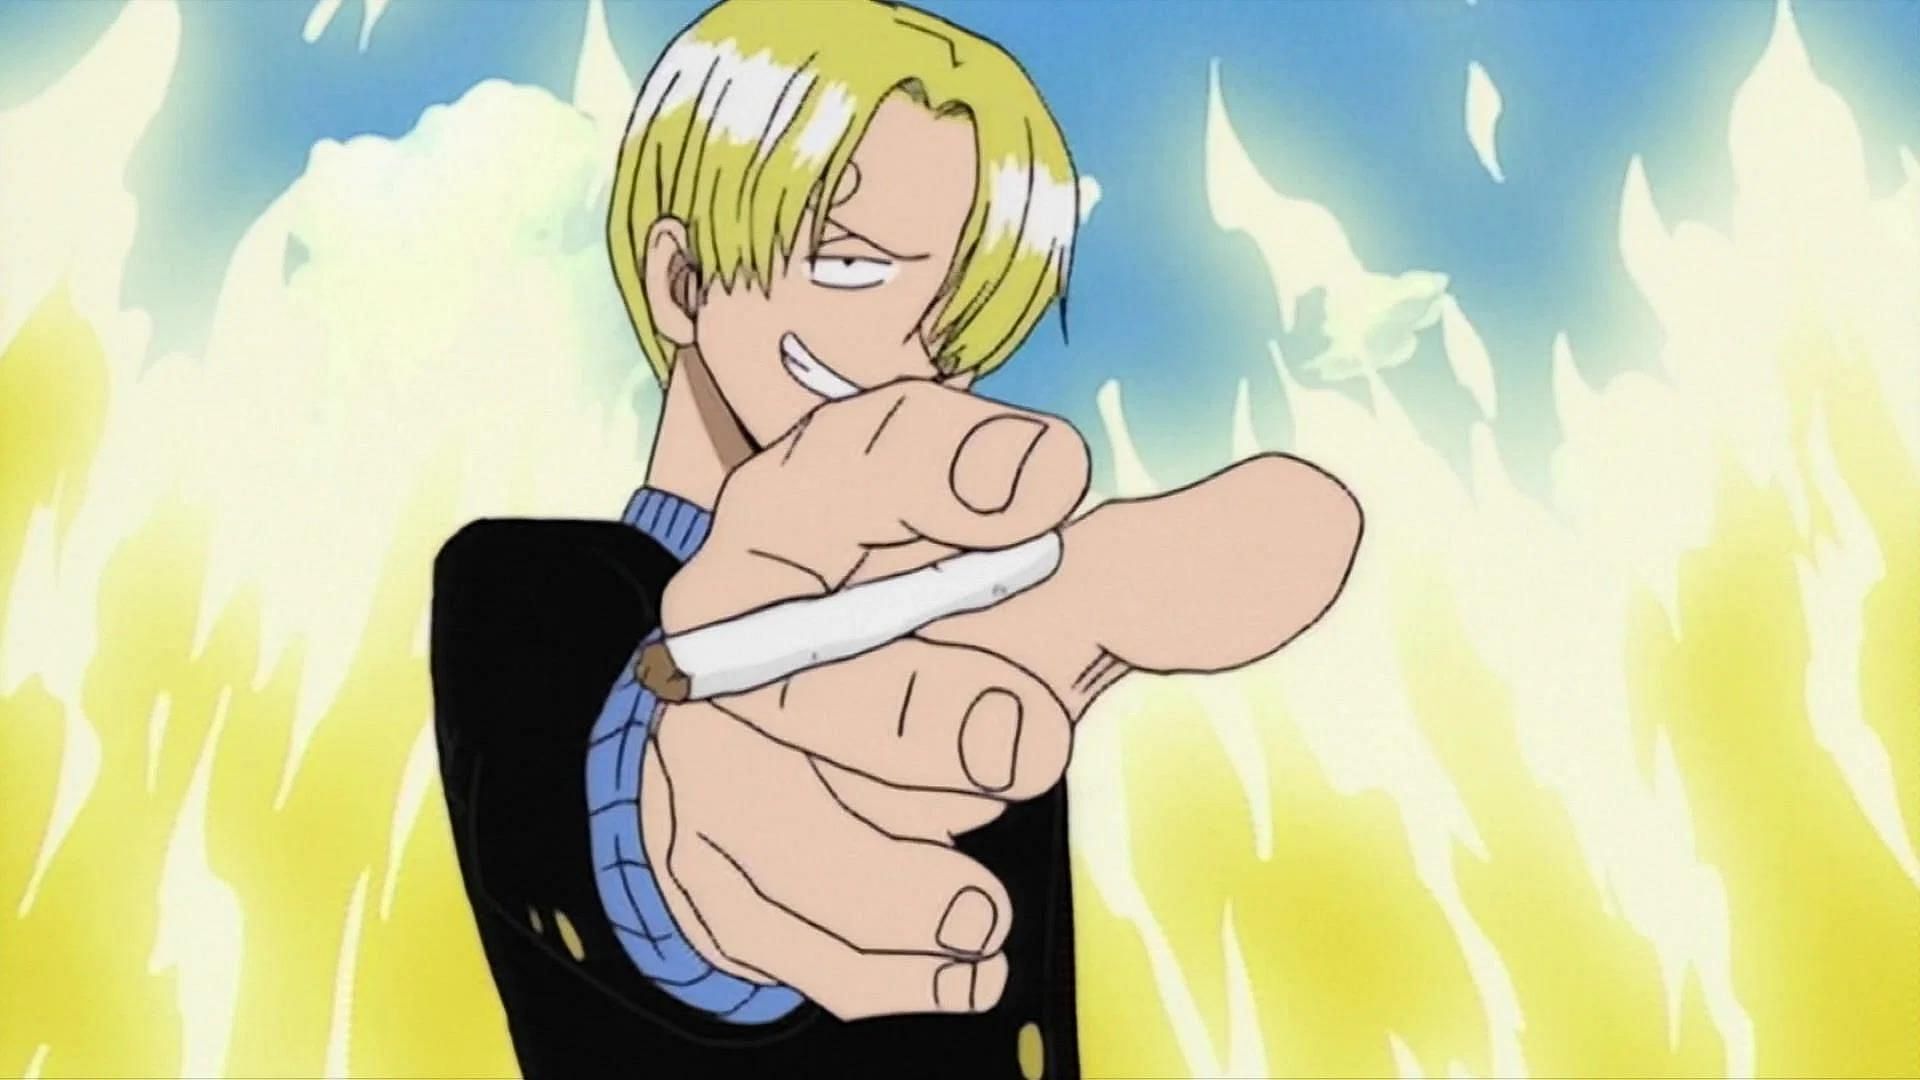 Sanji as shown during the Baratie arc (Image via Toei Animation)